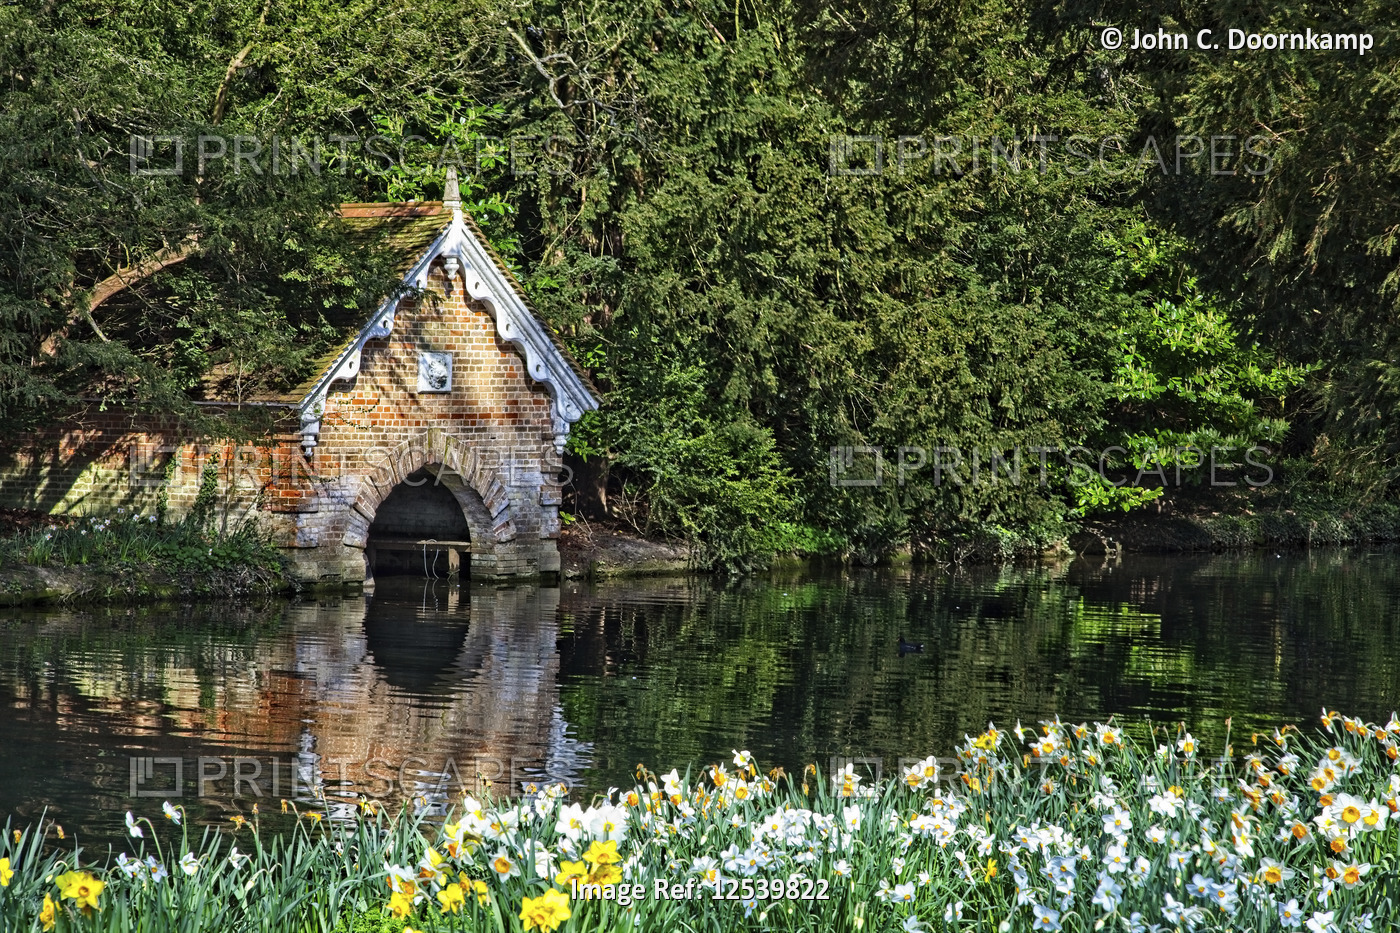 BOAT HOUSE, LAKE AND DAFFODILS, AUDLEY END, ENGLAND